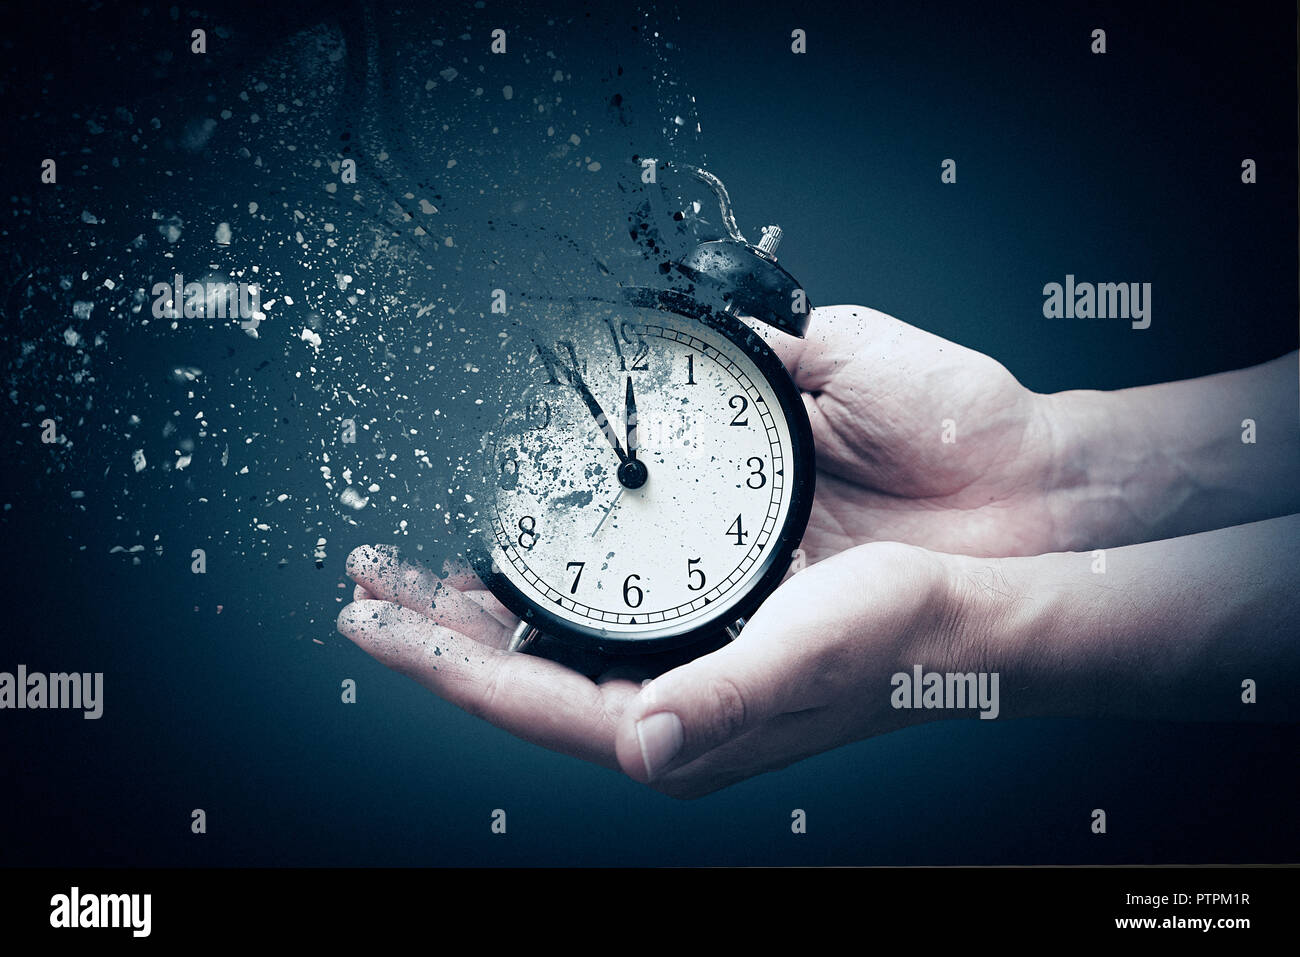 Concept of passing away, the clock breaks down into pieces. Hand holding analog clock with dispersion effect Stock Photo